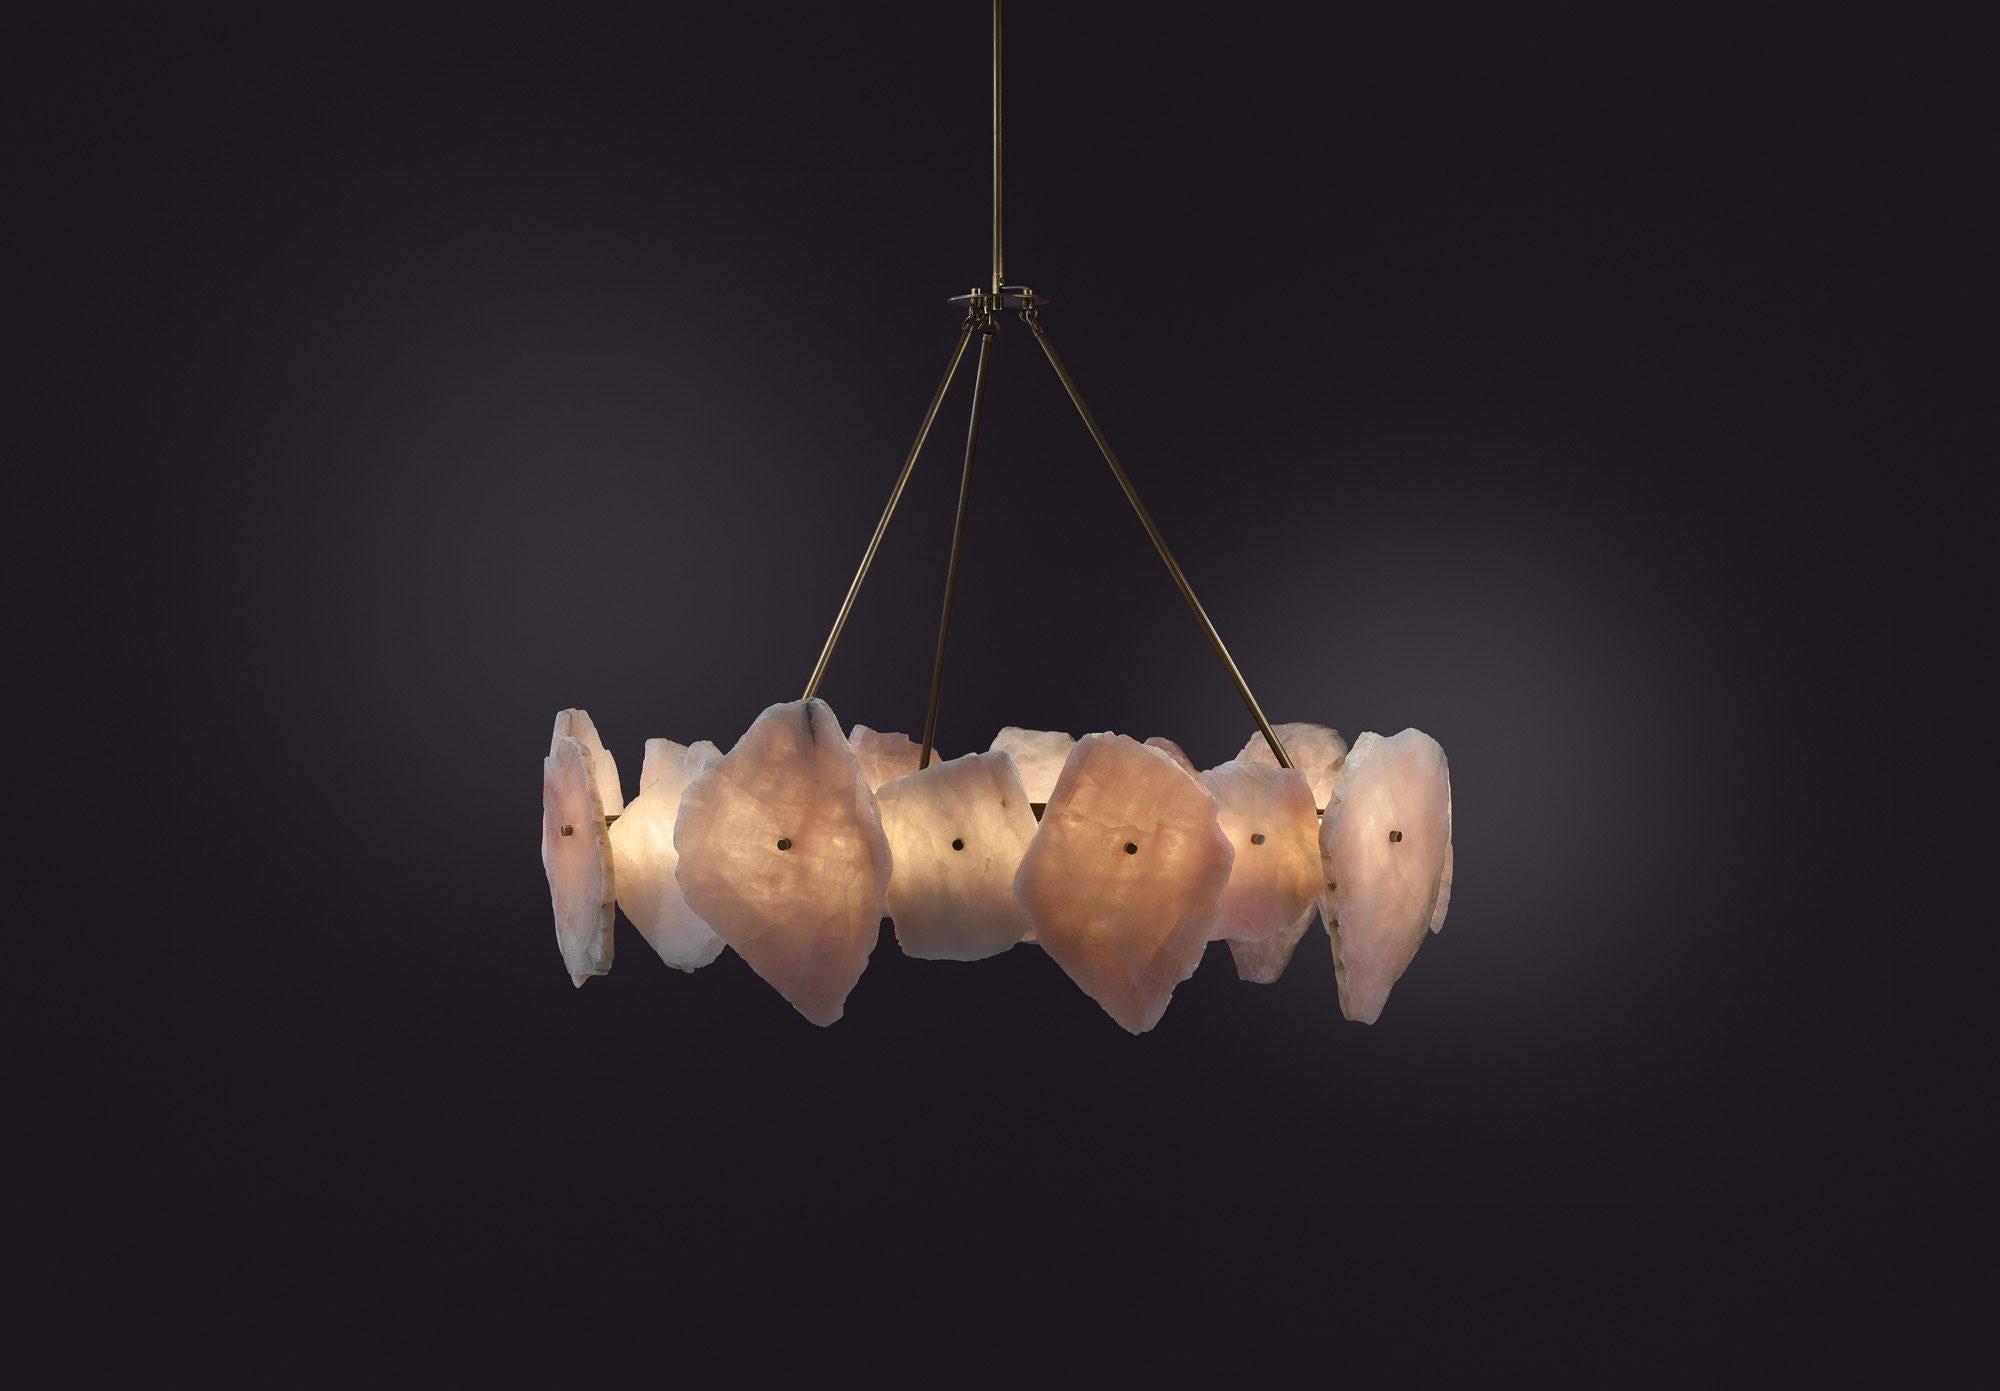 Contemporary chandelier in Quartz Slices and Brass - Petra III Circular 1100 by Christopher Boots

PETRA (from the Greek, meaning stone) celebrates the subtleties and complexities of quartz. Quartz was highly revered by the ancients who believed